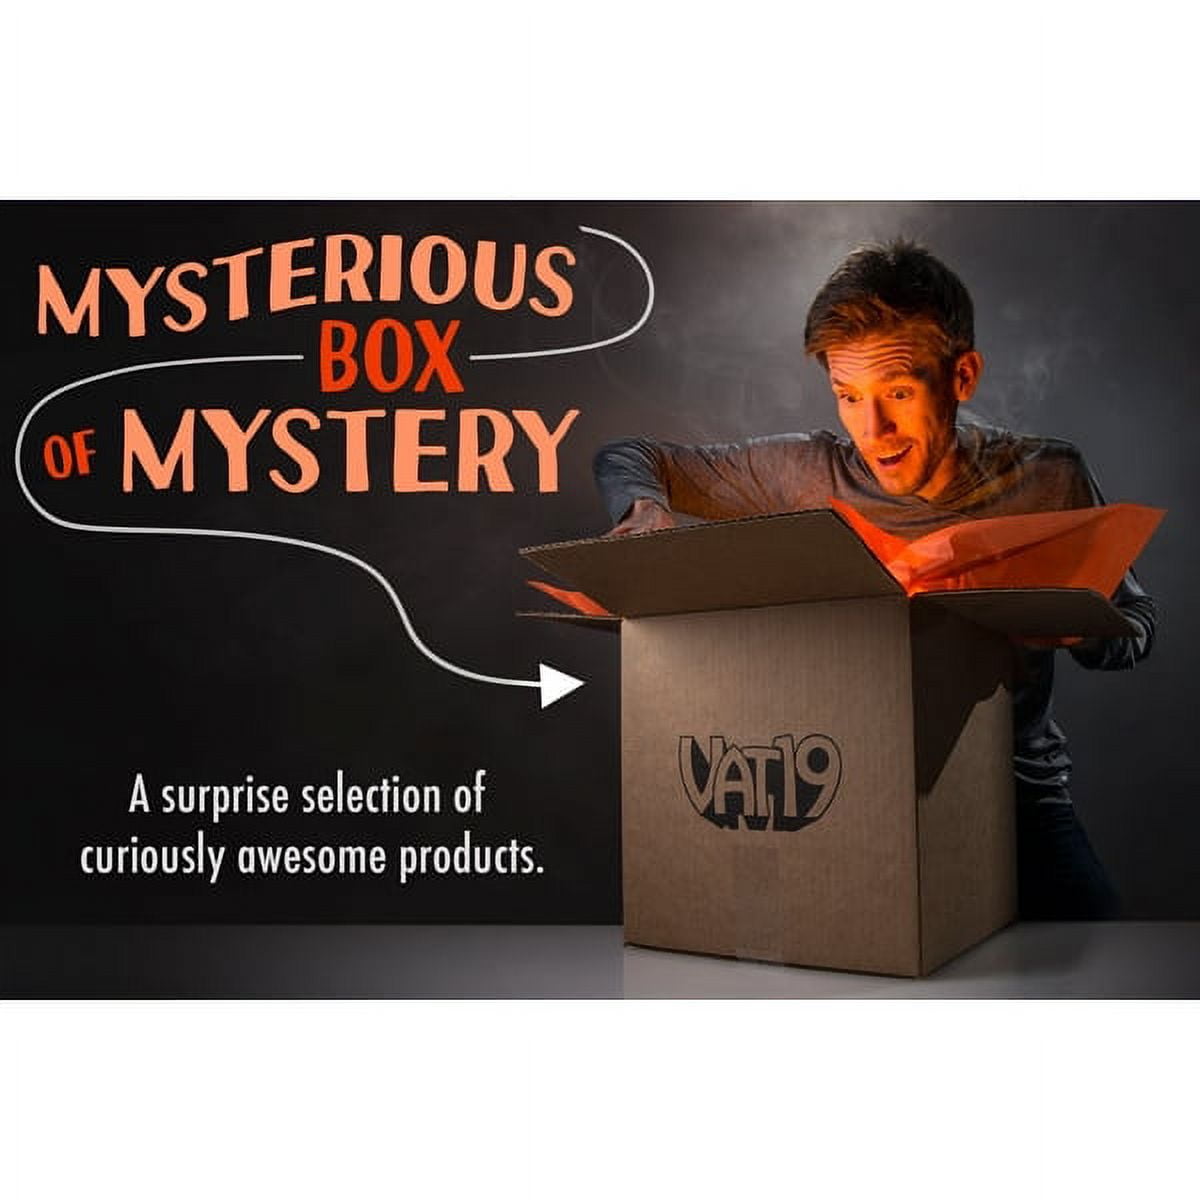 The Mysterious Box of Mystery: Surprise curated selection of Vat19